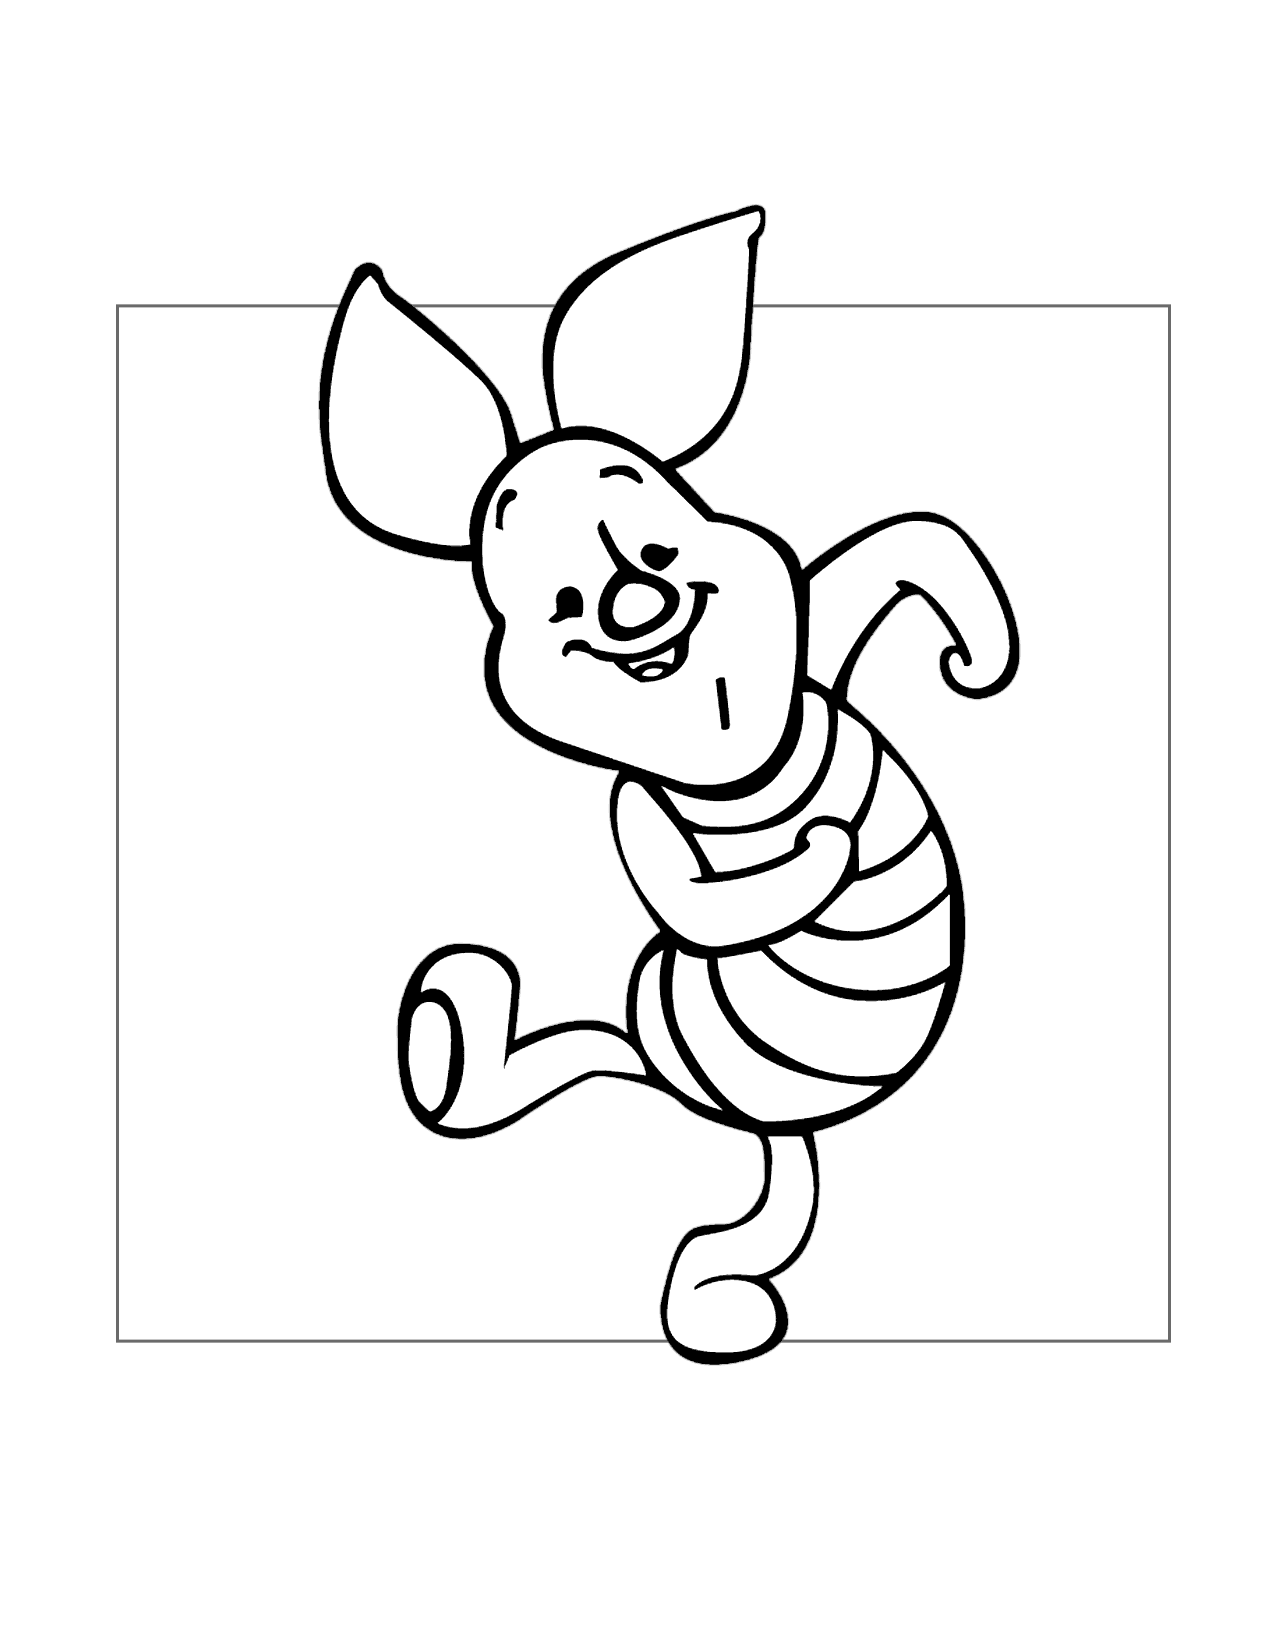 Happy Piglet Dancing Coloring Page